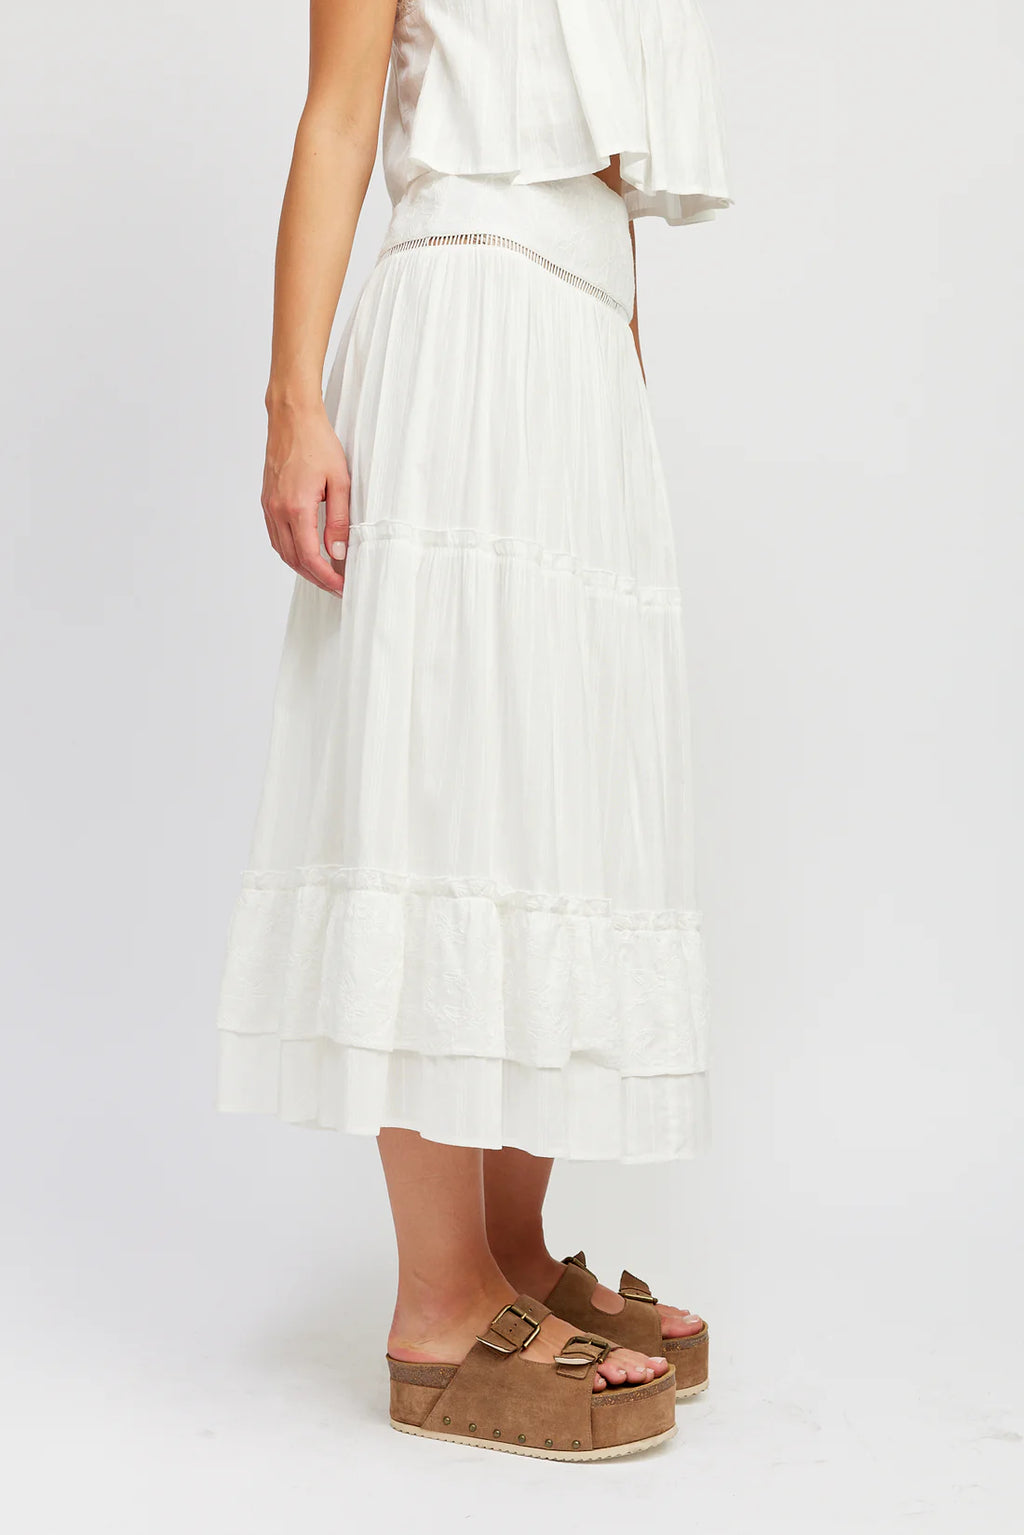 Jacquie The Label Naomi Embroidered Maxi Skirt